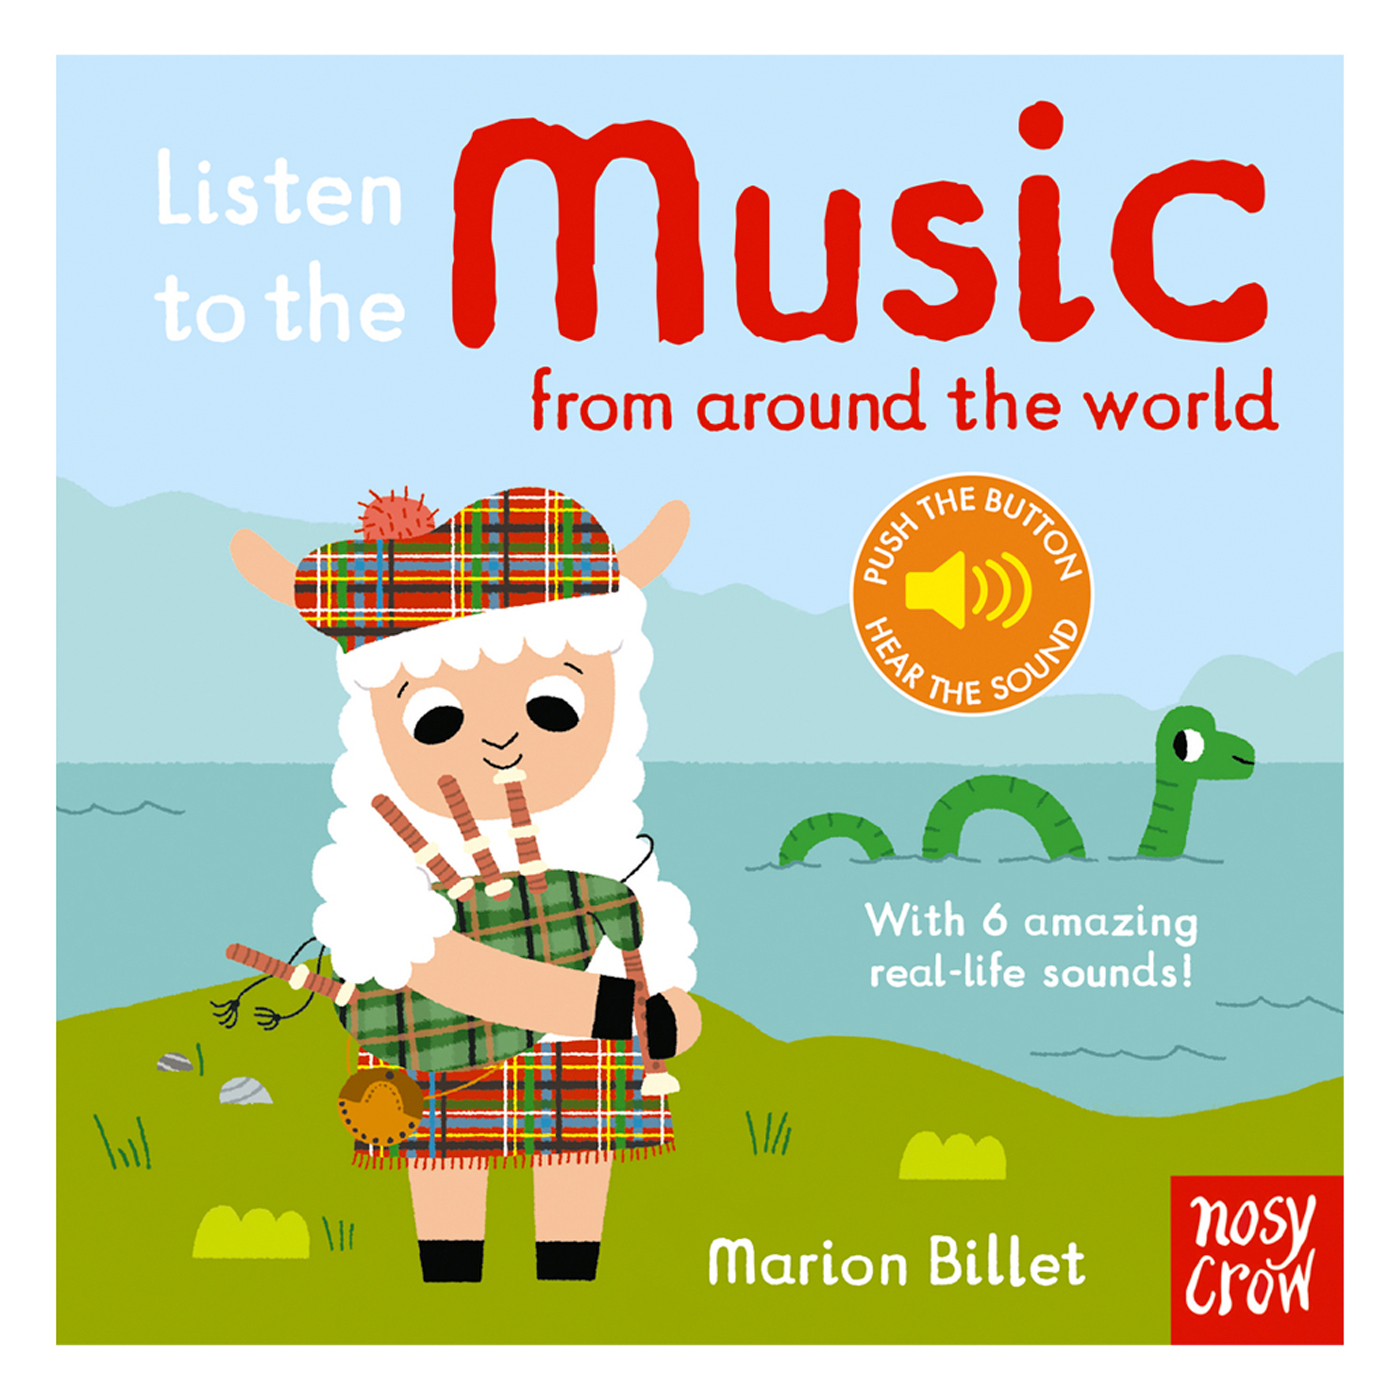 NOSY CROW Listen to the: Music from around the world